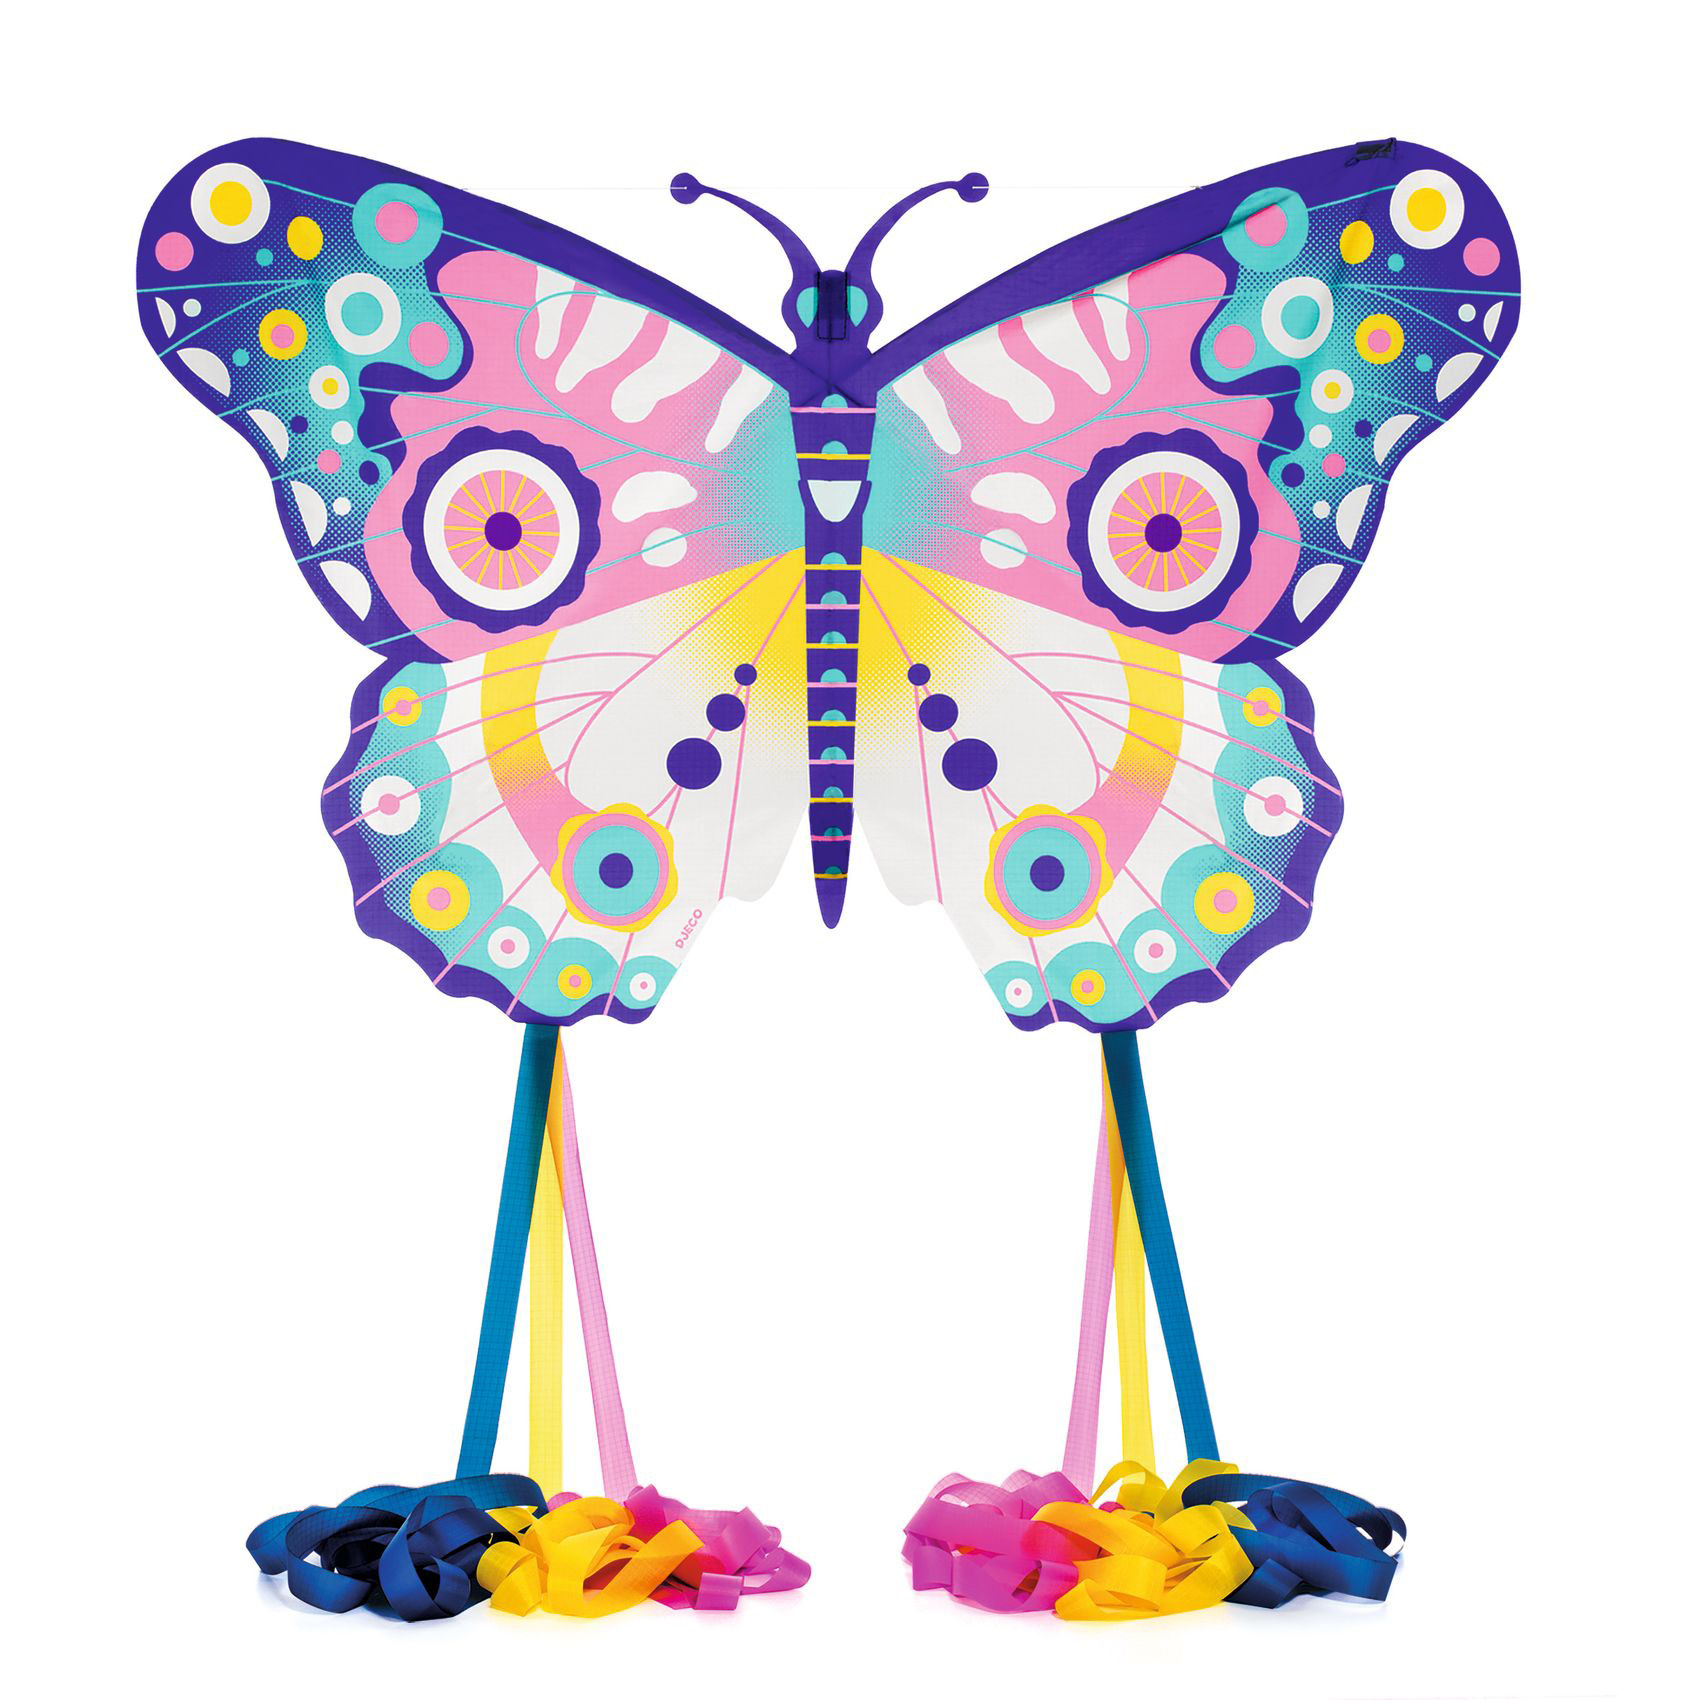 Aquilone Maxi Butterfly - Djeco